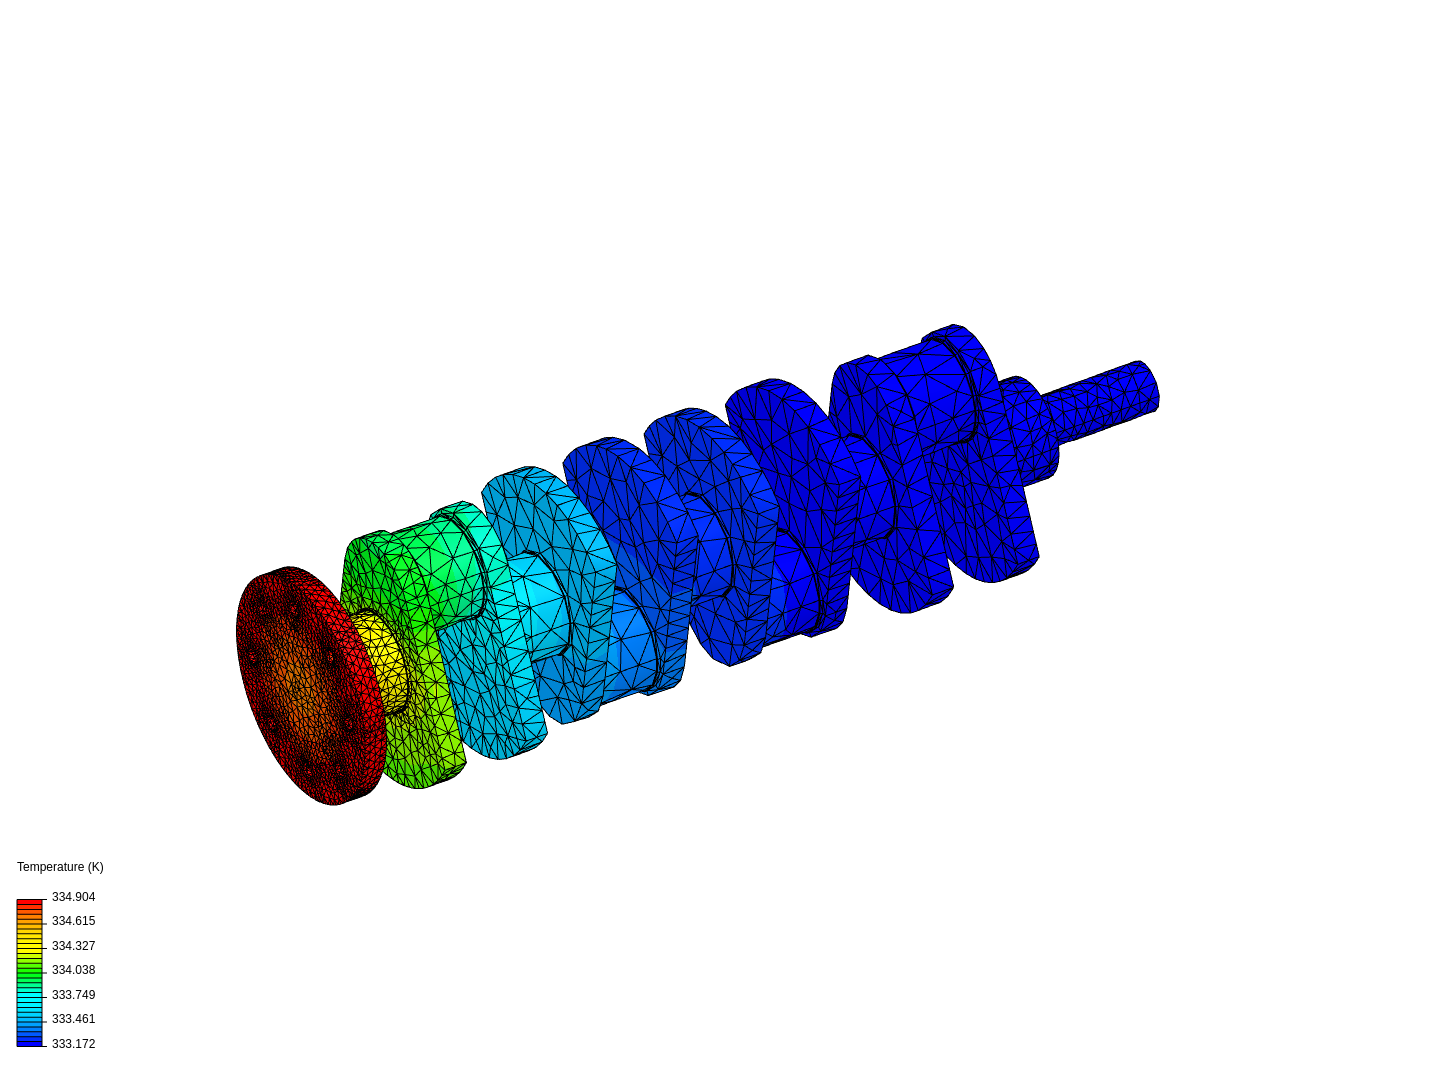 camshaft_structural_analysis image